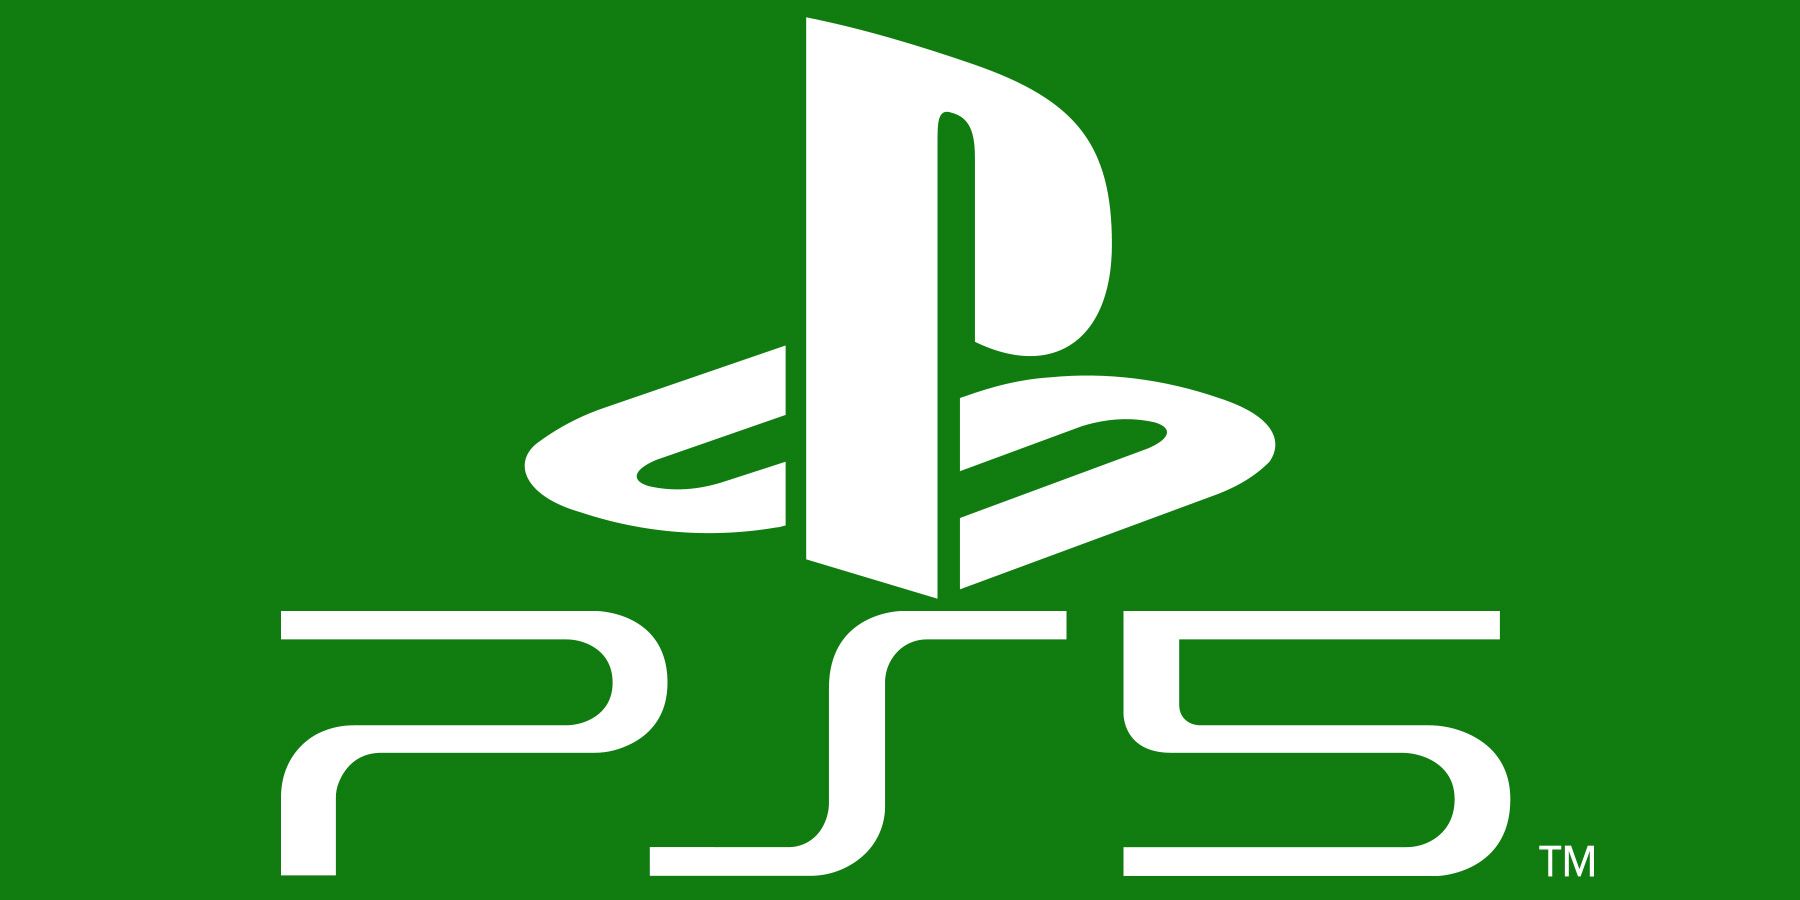 white Sony PS5 logo and PlayStation emblem submark on Xbox green background